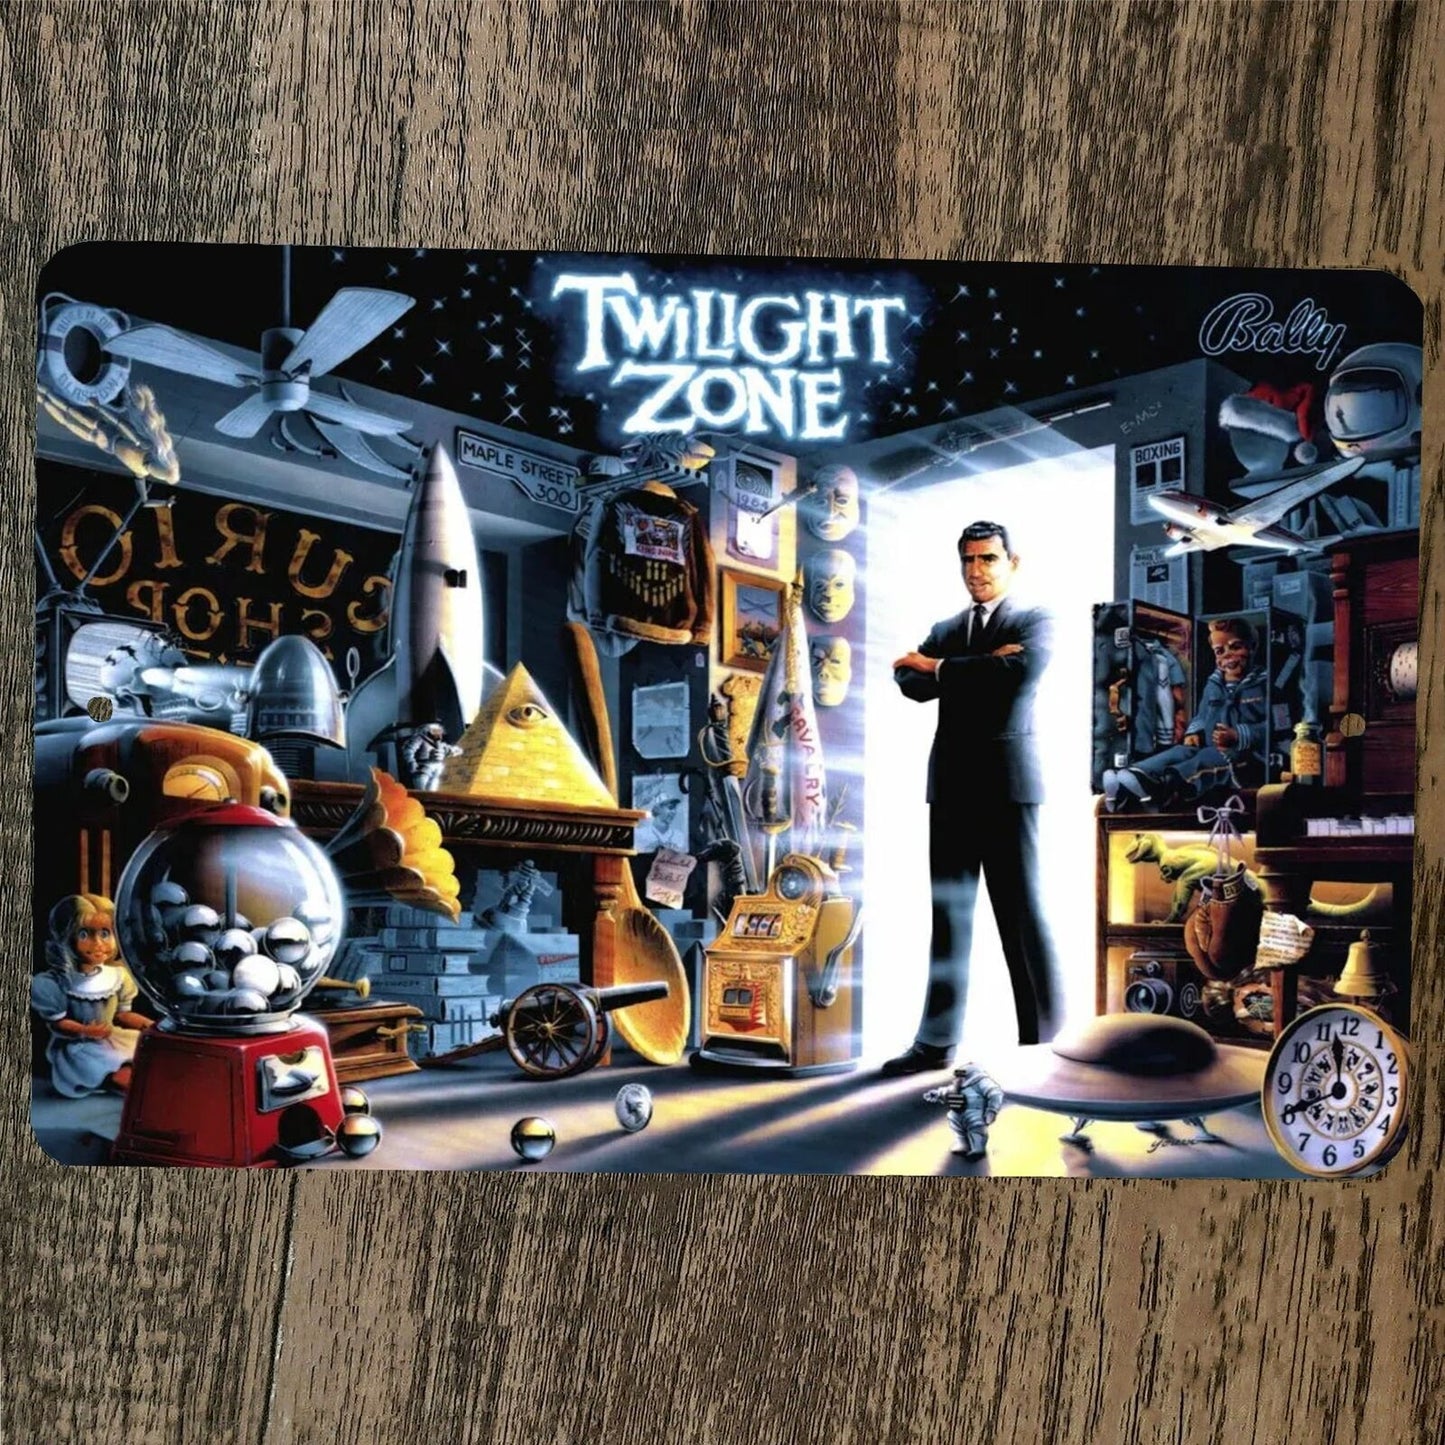 Twilight Zone 8x12 Metal Wall Sign Video Game Arcade Poster